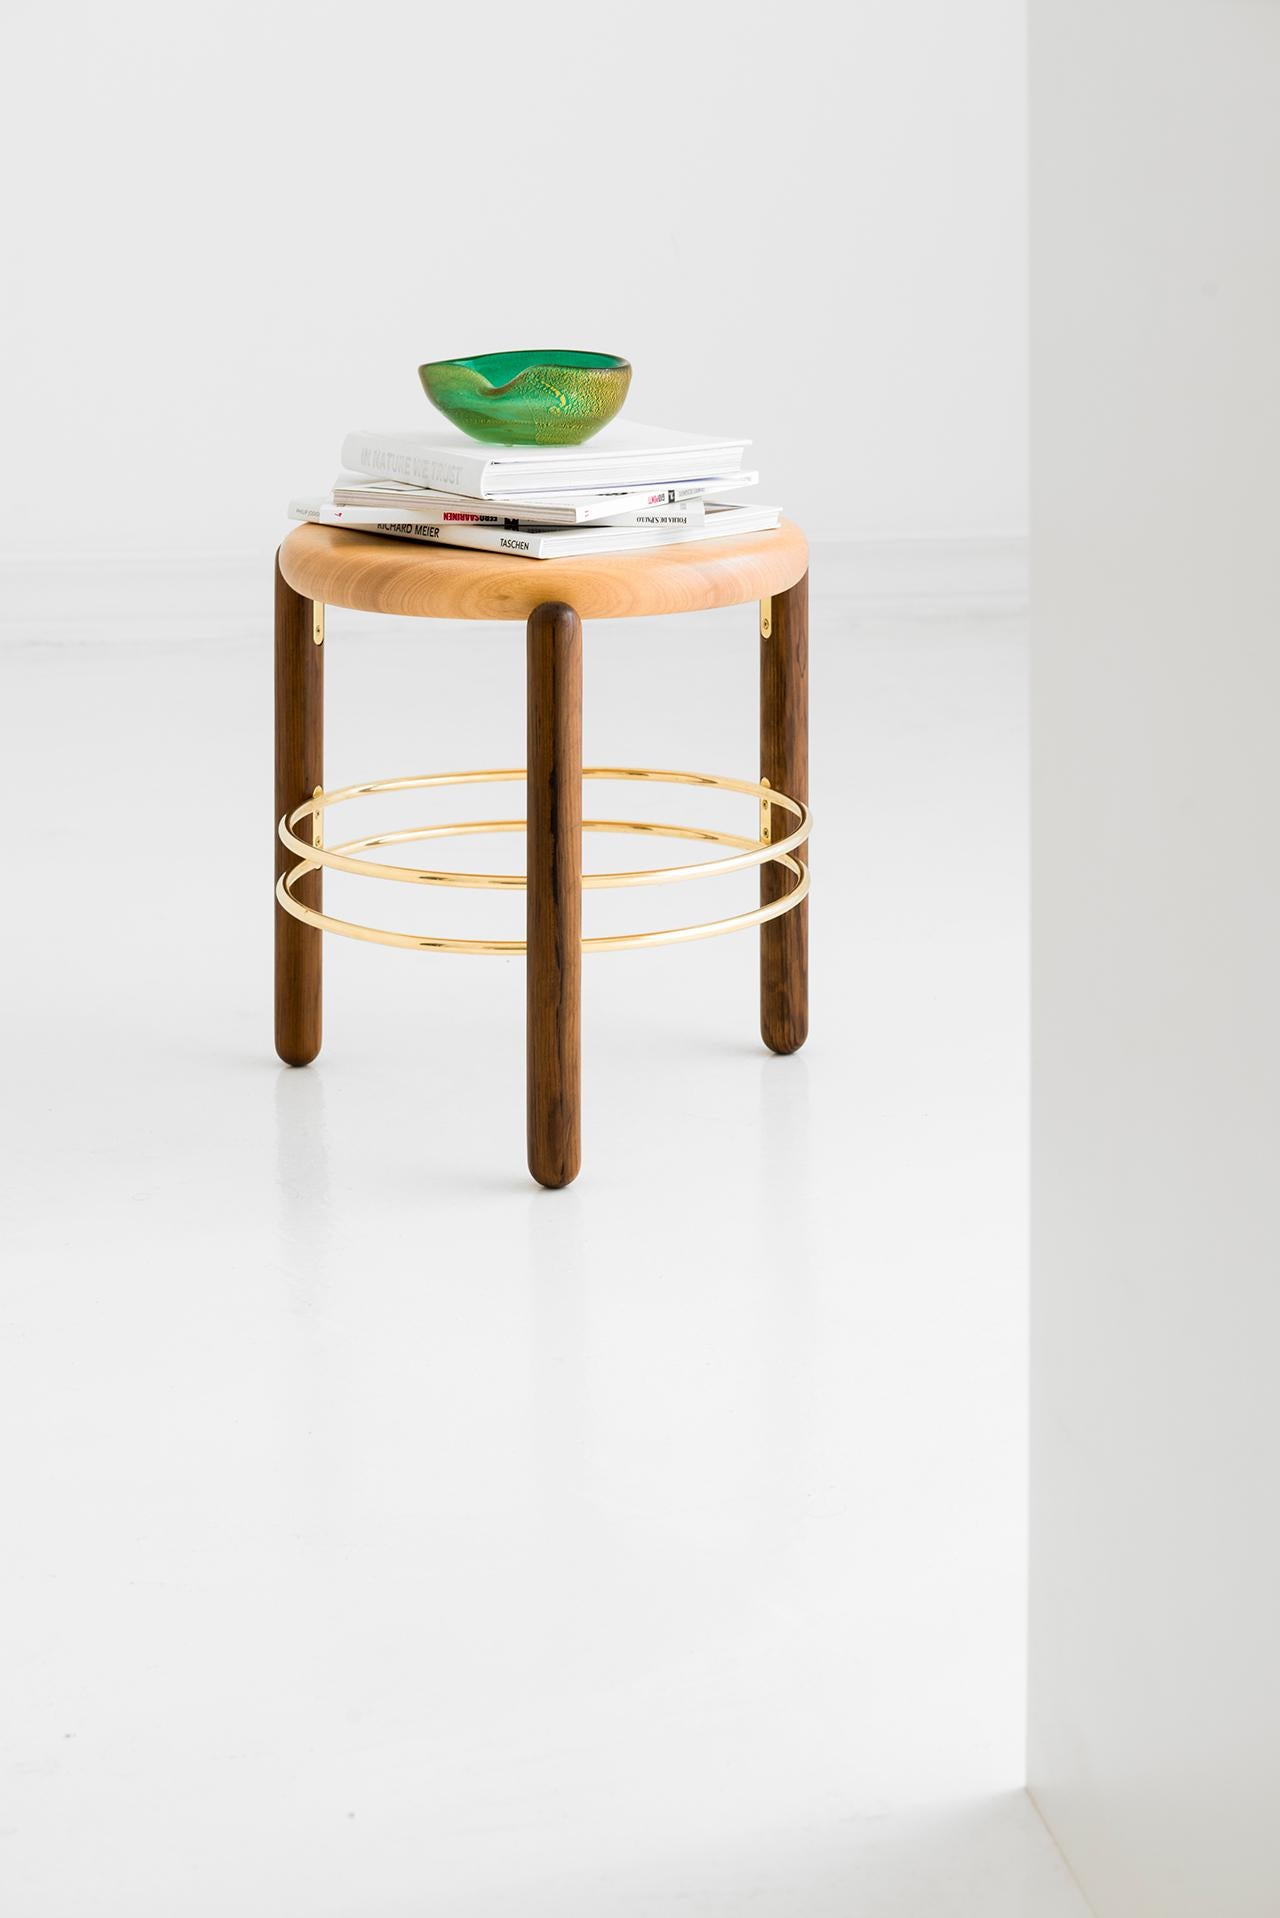 Brass and Wood Sculpted Stool by Leandro Garcia Contemporary Brazil Design In New Condition For Sale In Geneve, CH